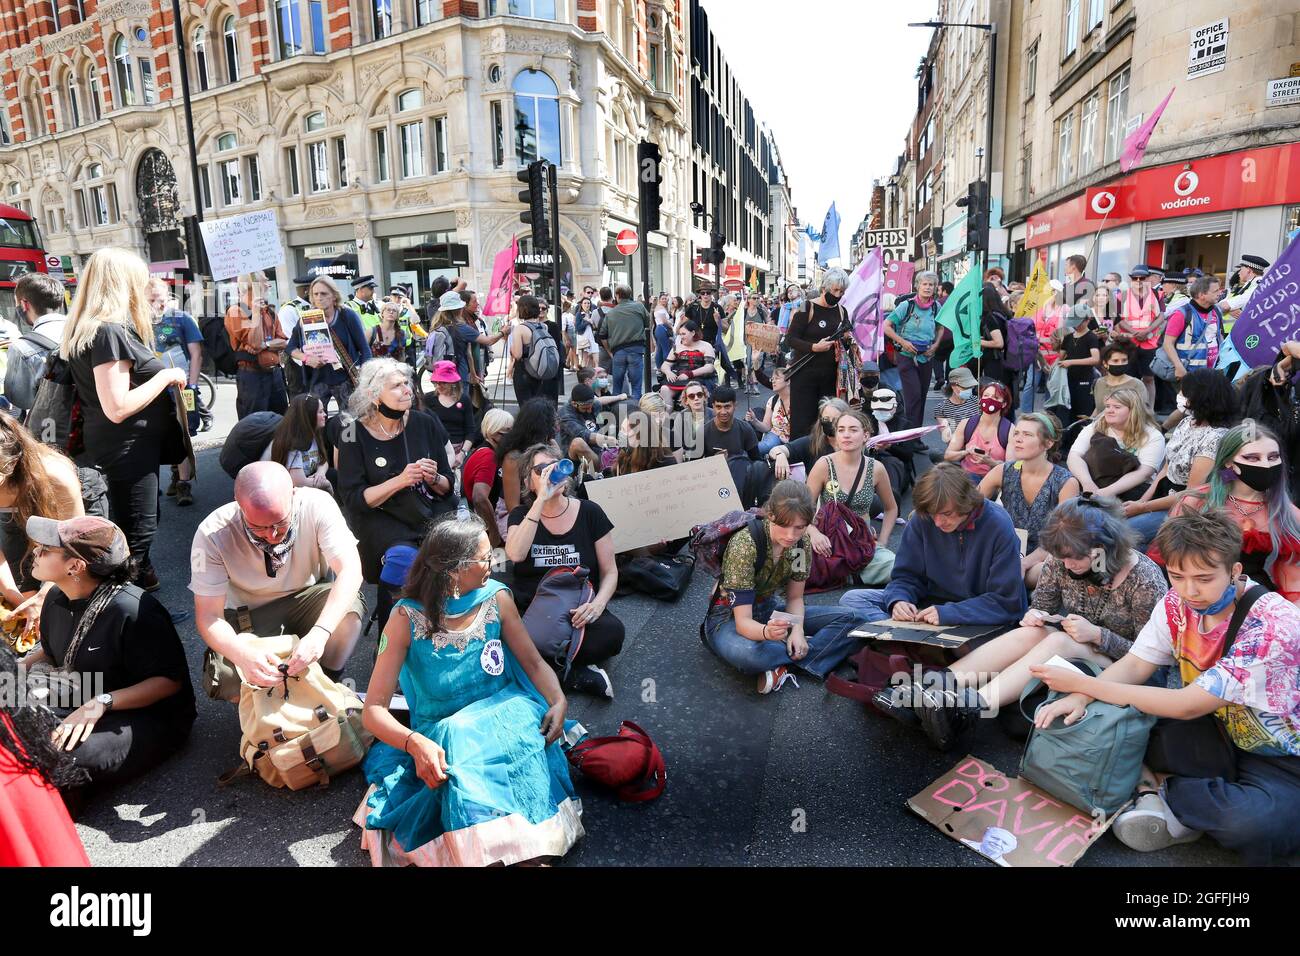 London, UK. 25th Aug, 2021. Protesters sitting on the ground at Oxford Circus, during the Impossible Rebellion - Day 3. Led by Female, Intersex, Non-binary and Trans (FINT) people from Extinction Rebellion, rebels demand that government change policies to address the ecological and climate emergency and immediately stop all new fossil fuel investments. Credit: SOPA Images Limited/Alamy Live News Stock Photo